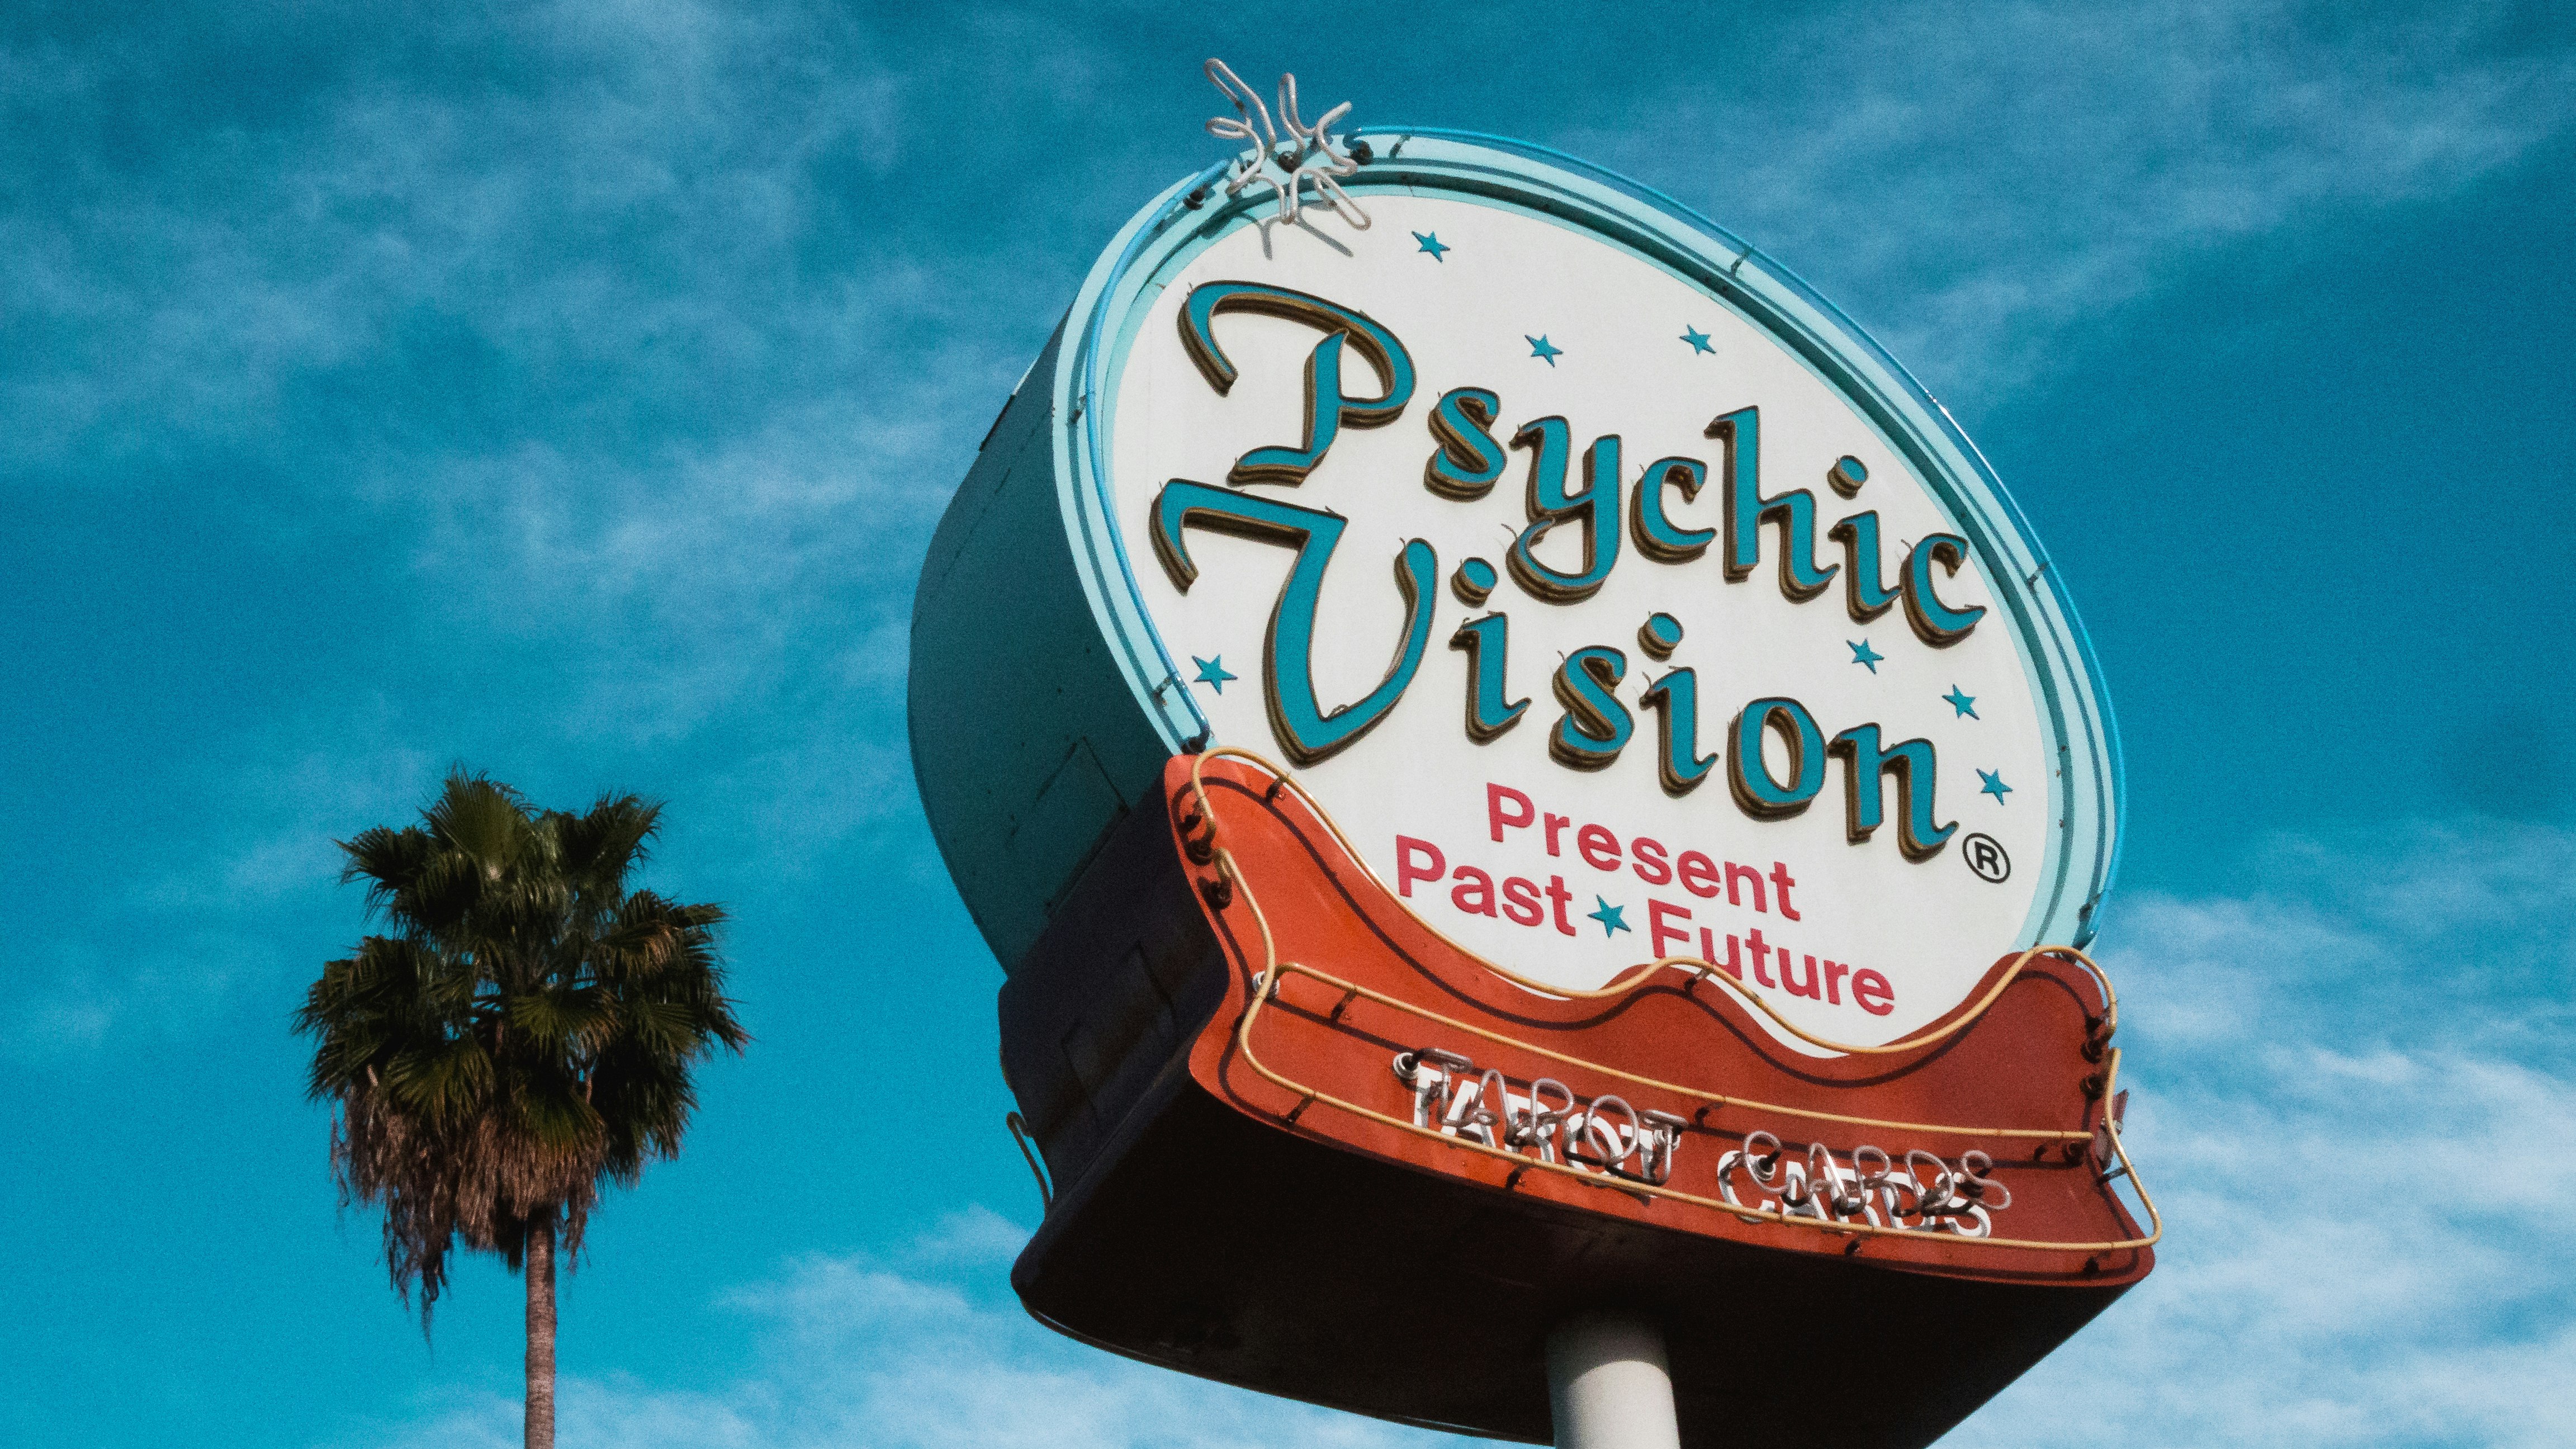 Psychic Vision made in LA